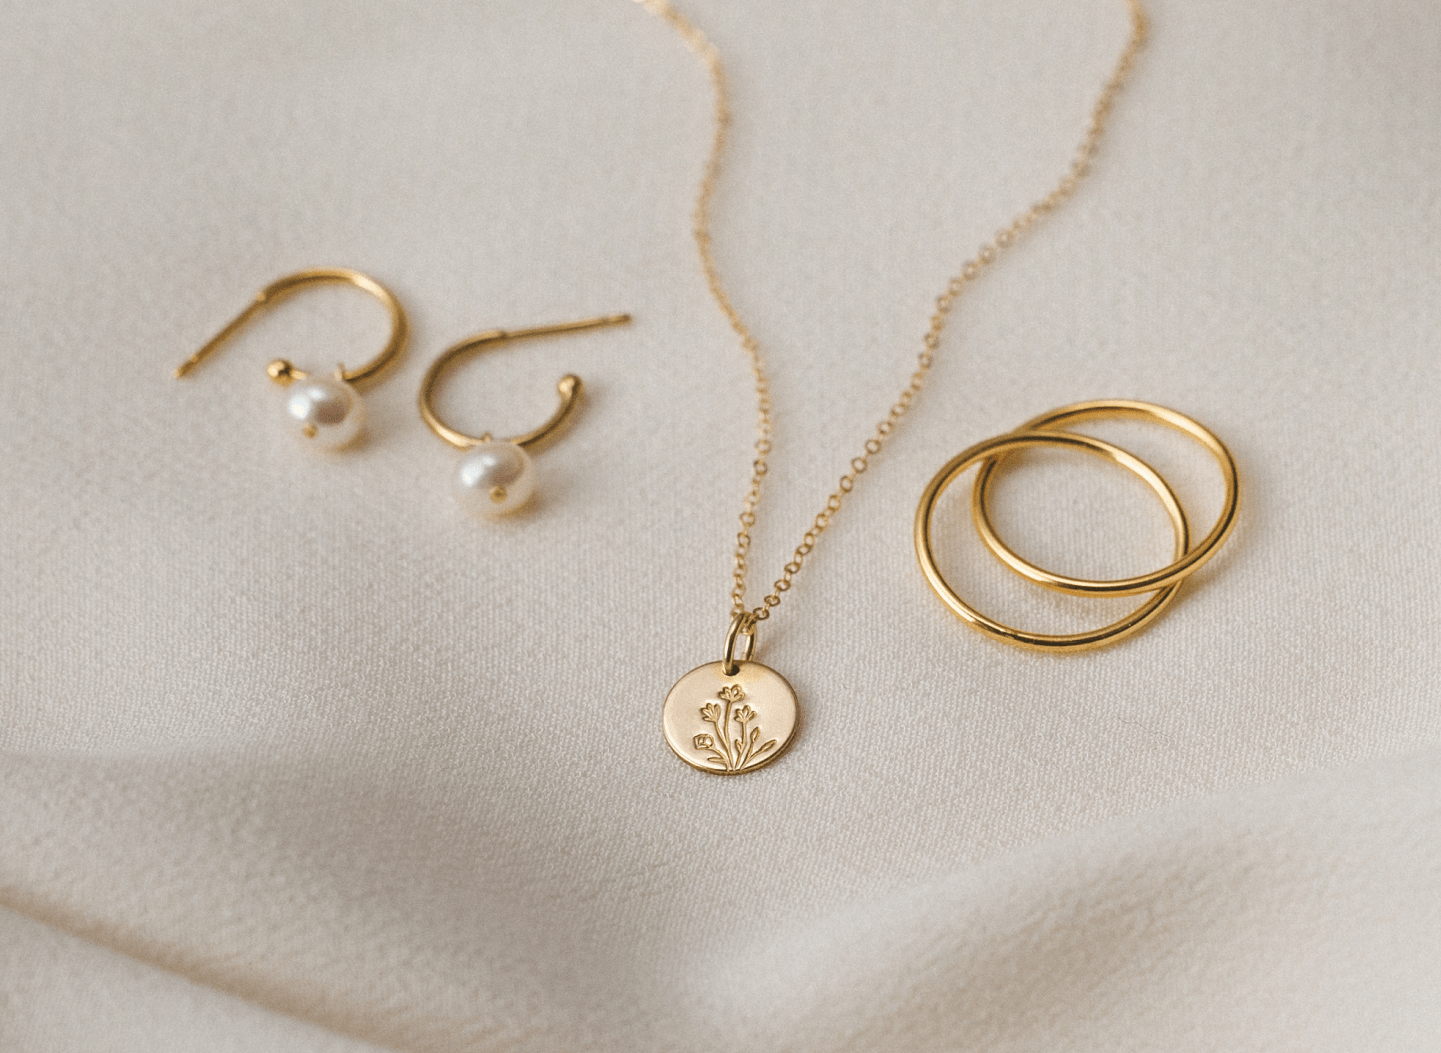 Solid Gold Jewelry Gifts Under $350